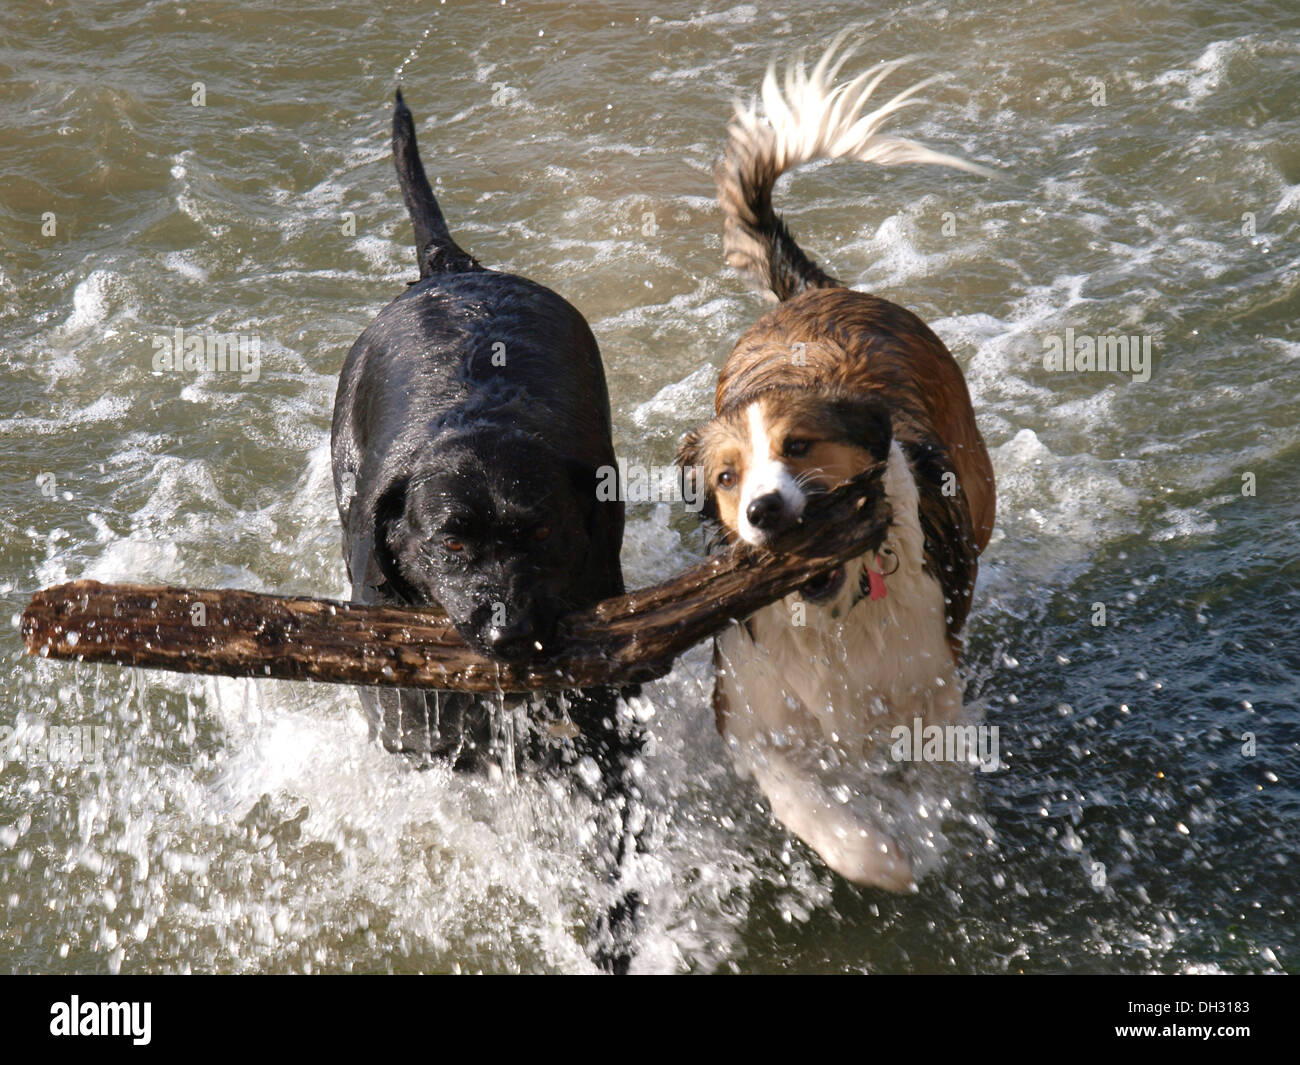 Two dogs bring a large stick out of water together, UK Stock Photo